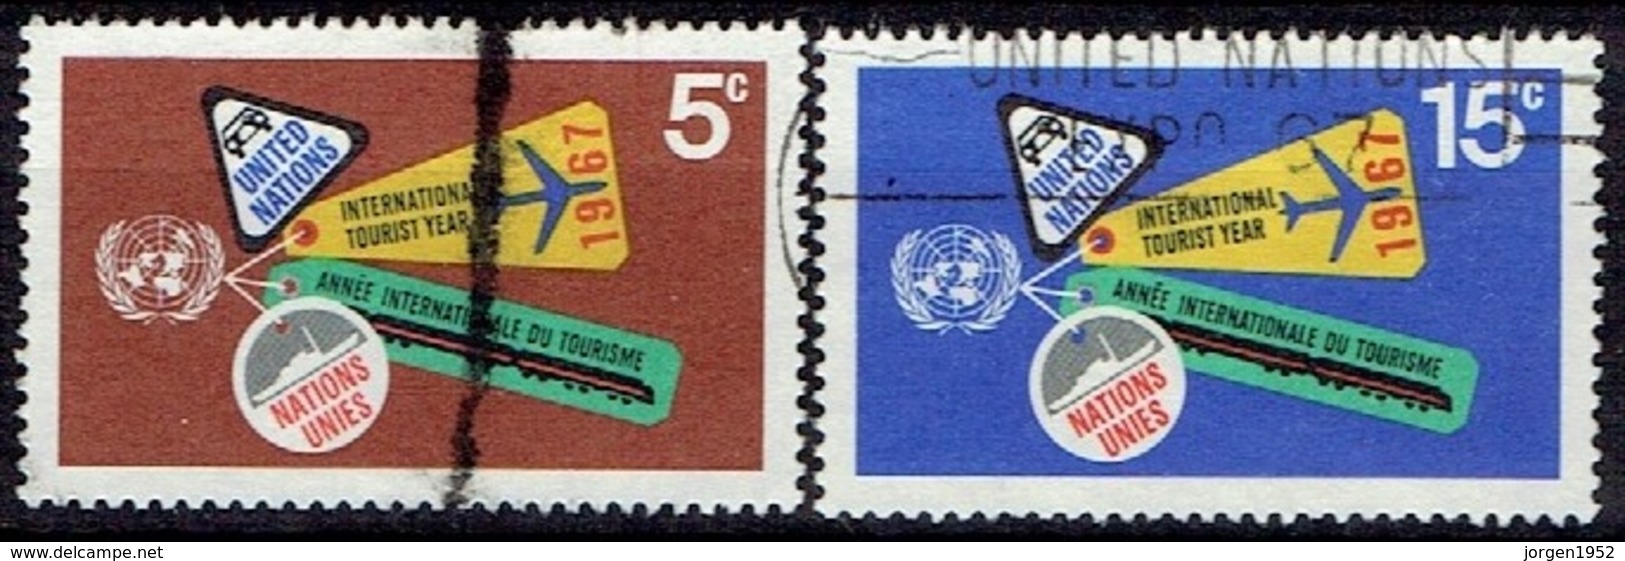 UNITED NATIONS # NEW YORK FROM 1967 STAMPWORLD 185-86 - Oblitérés